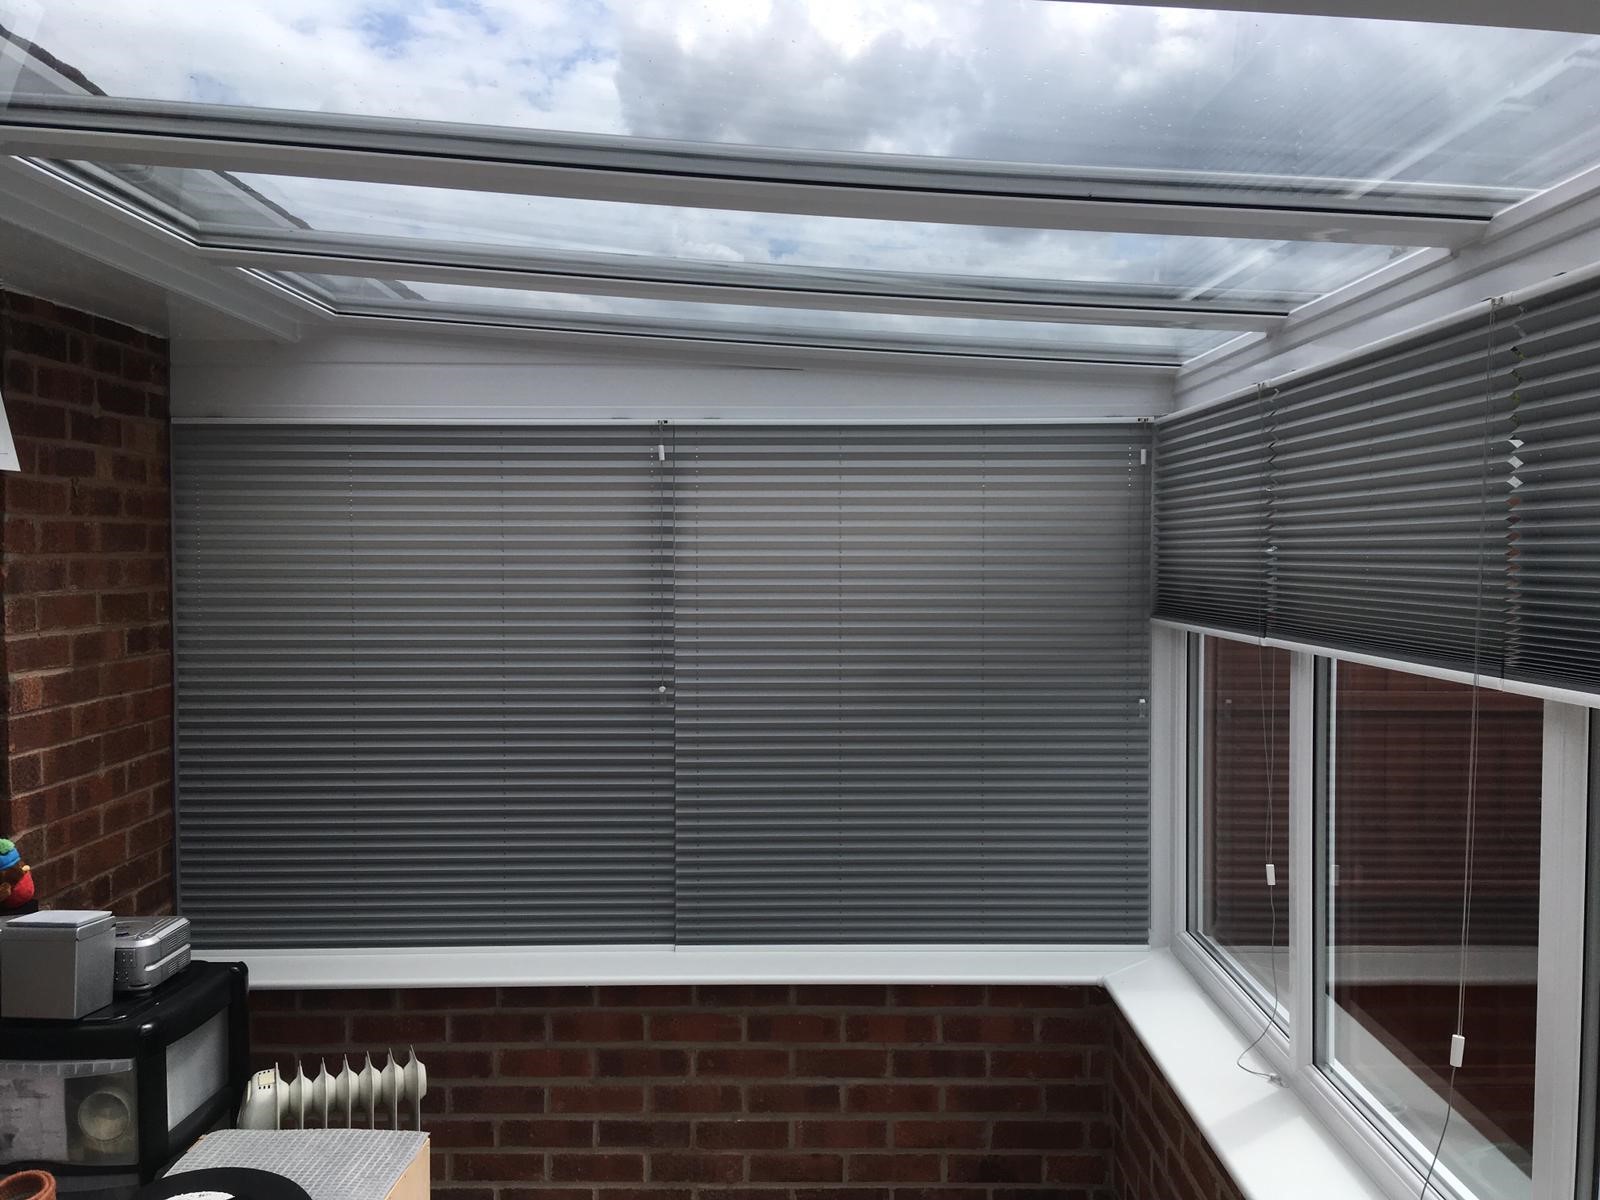 UK Specialists of Pleated Blinds For Hot Summers